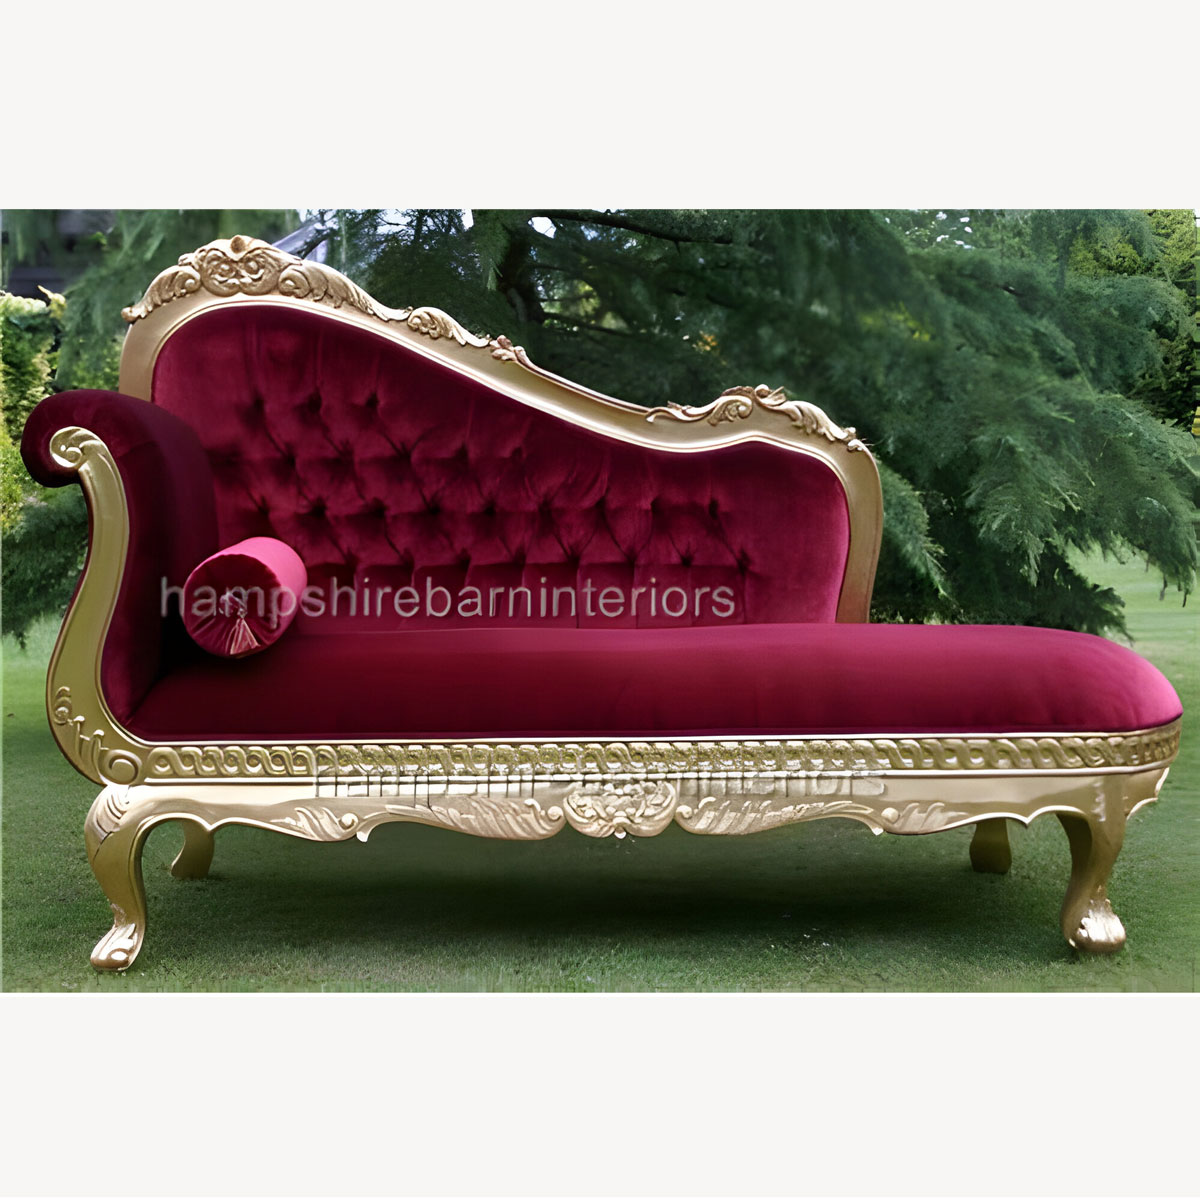 Beautiful Red Velvet And Gold Leaf Hilton Chaise Longue 1 - Hampshire Barn Interiors - Beautiful Red Velvet And Gold Leaf Hilton Chaise Longue -